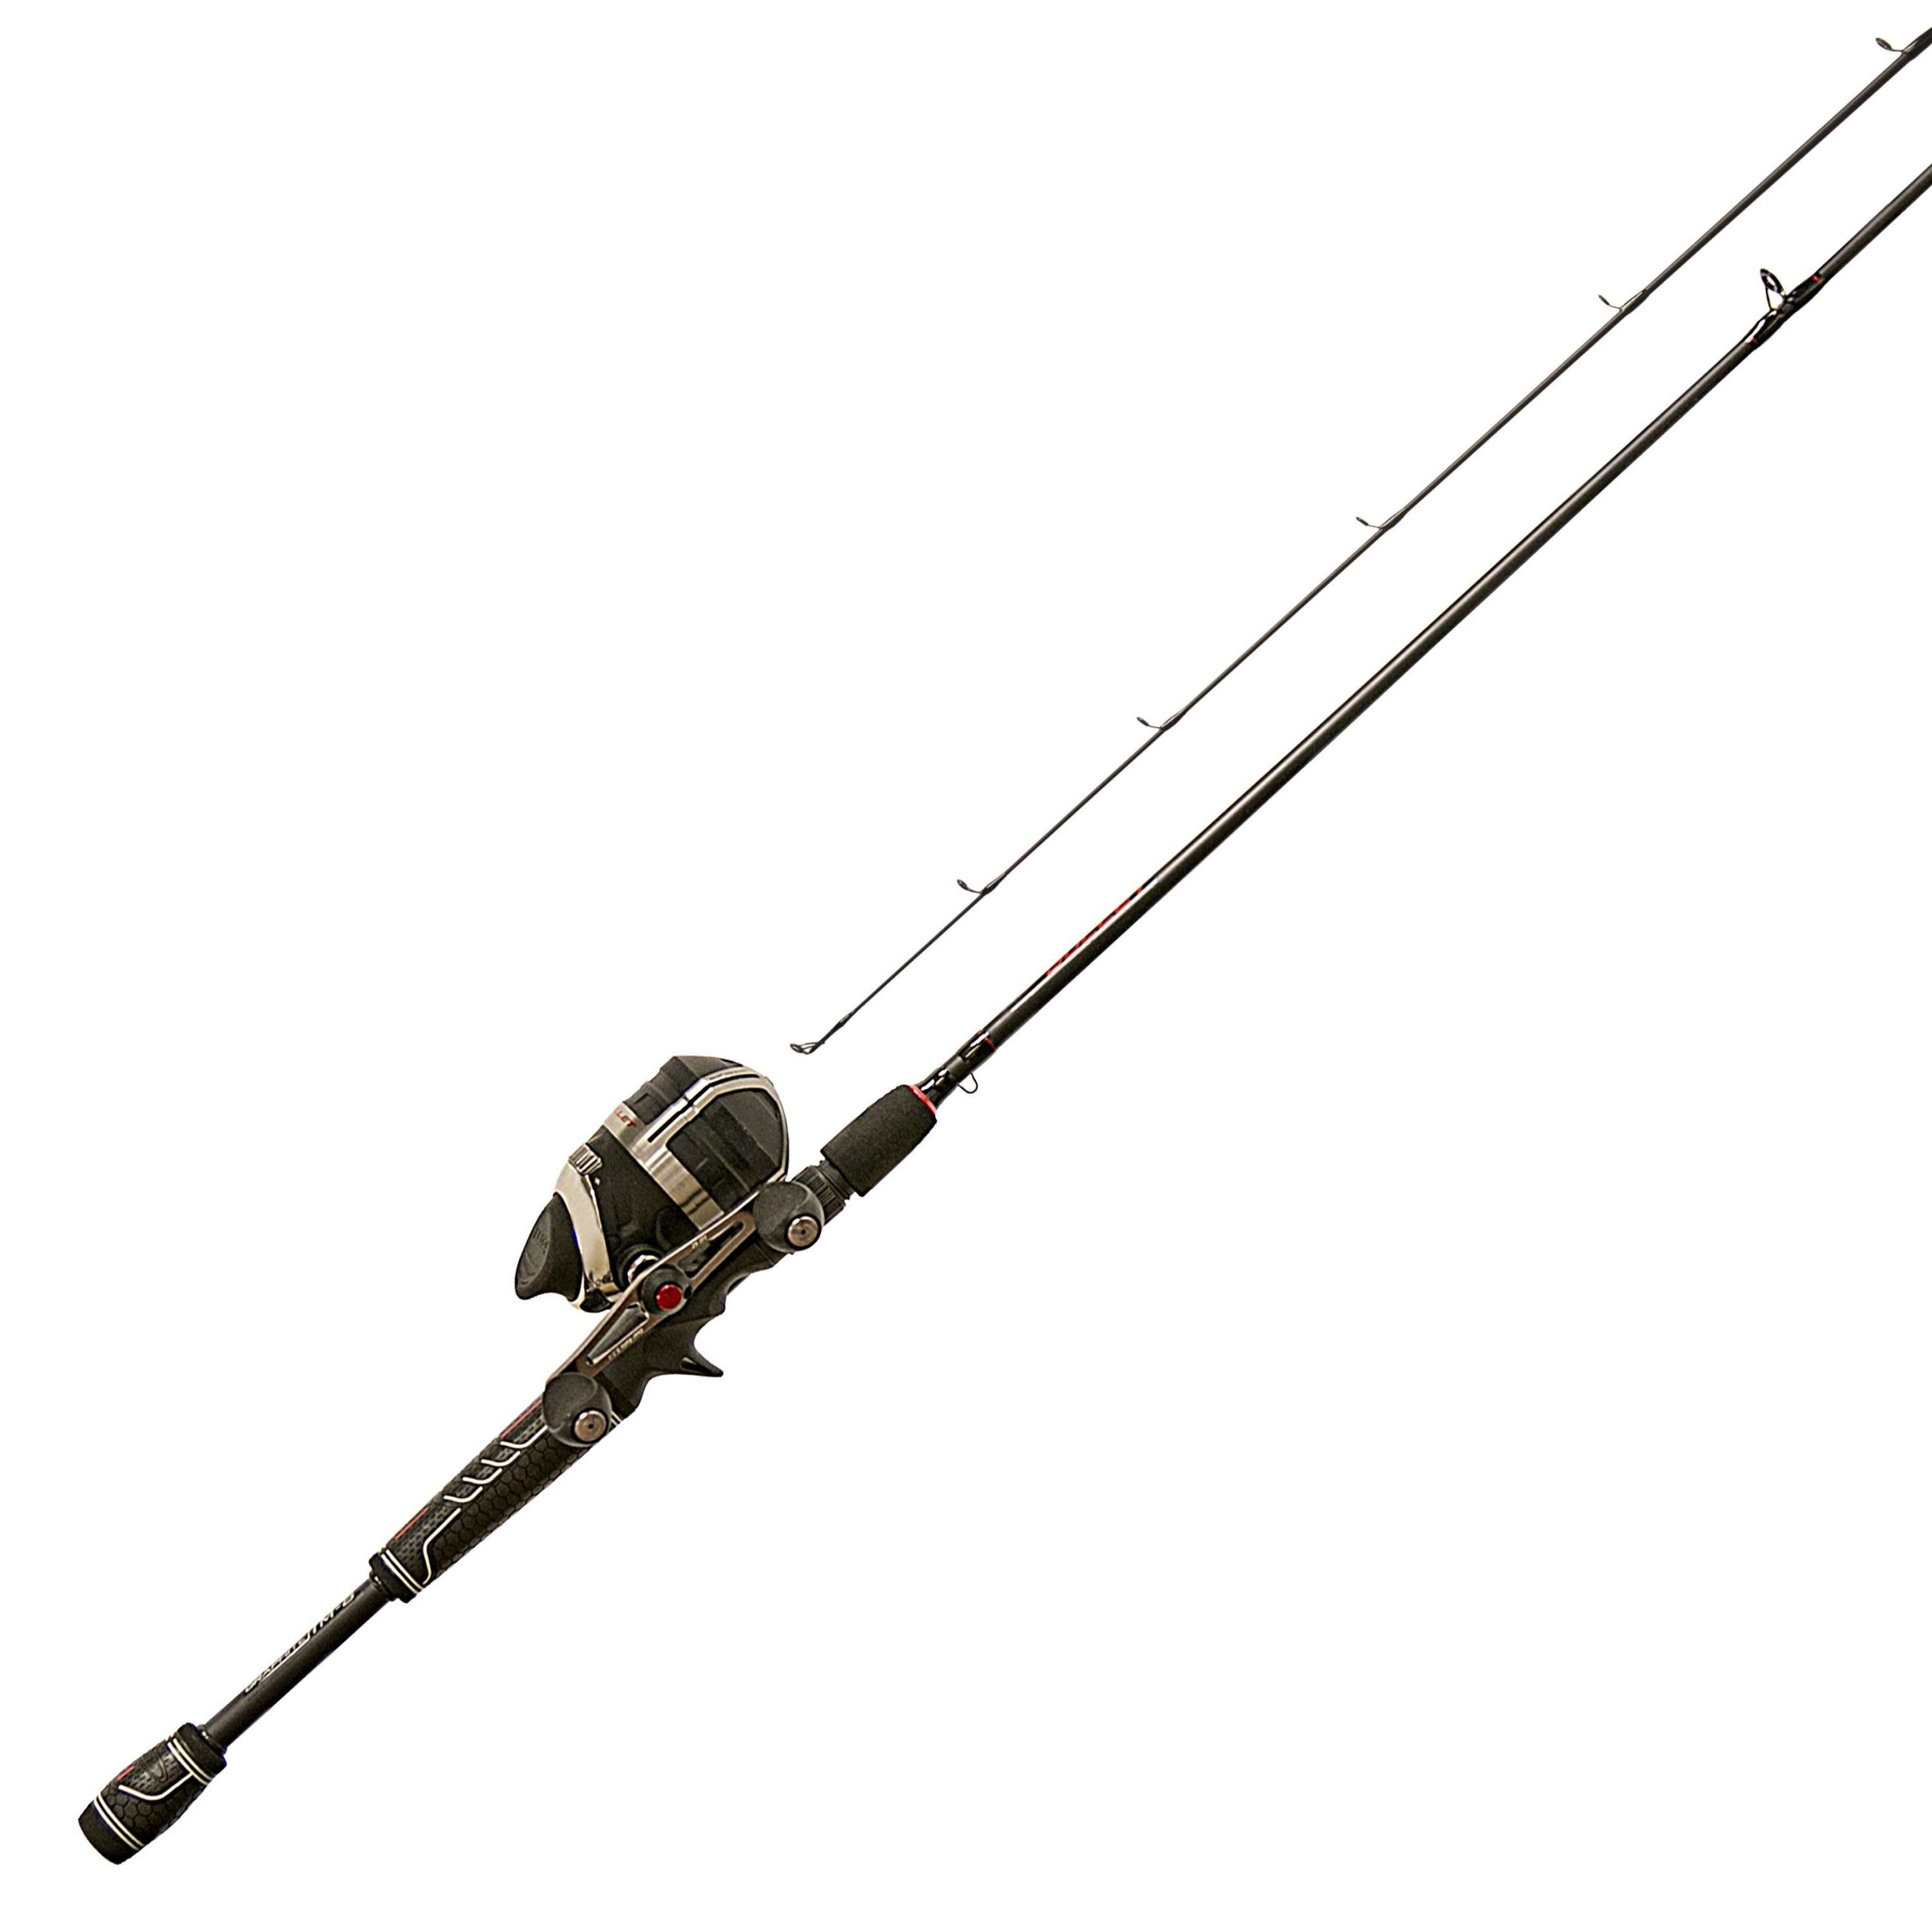 Bullet Combo<br>
Zebco <br>
$139.99 <br>
The fastest spincast reel EVER is now available as a combo, paired with a lightweight IM8 rod featuring WinnGrip handles for all-weather comfort and tactile grip. The reel sports a CNC-machined high speed drive gear yielding 29.6